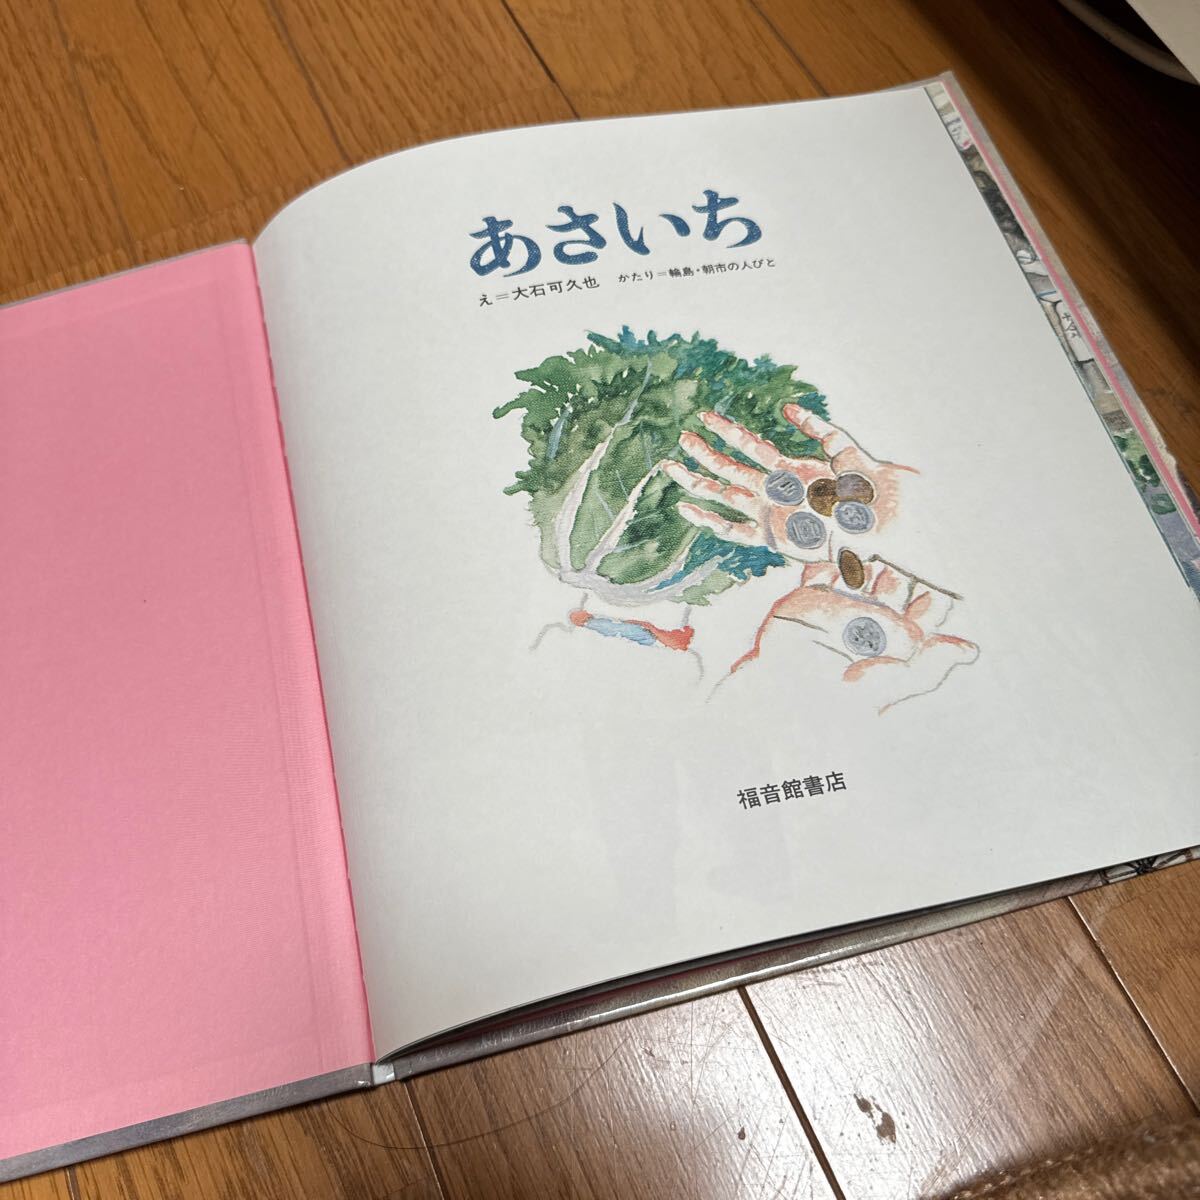  luck sound pavilion bookstore picture book ........ .. kodomonotomo company . large stone possible .. wheel island morning market. person .. postage included 